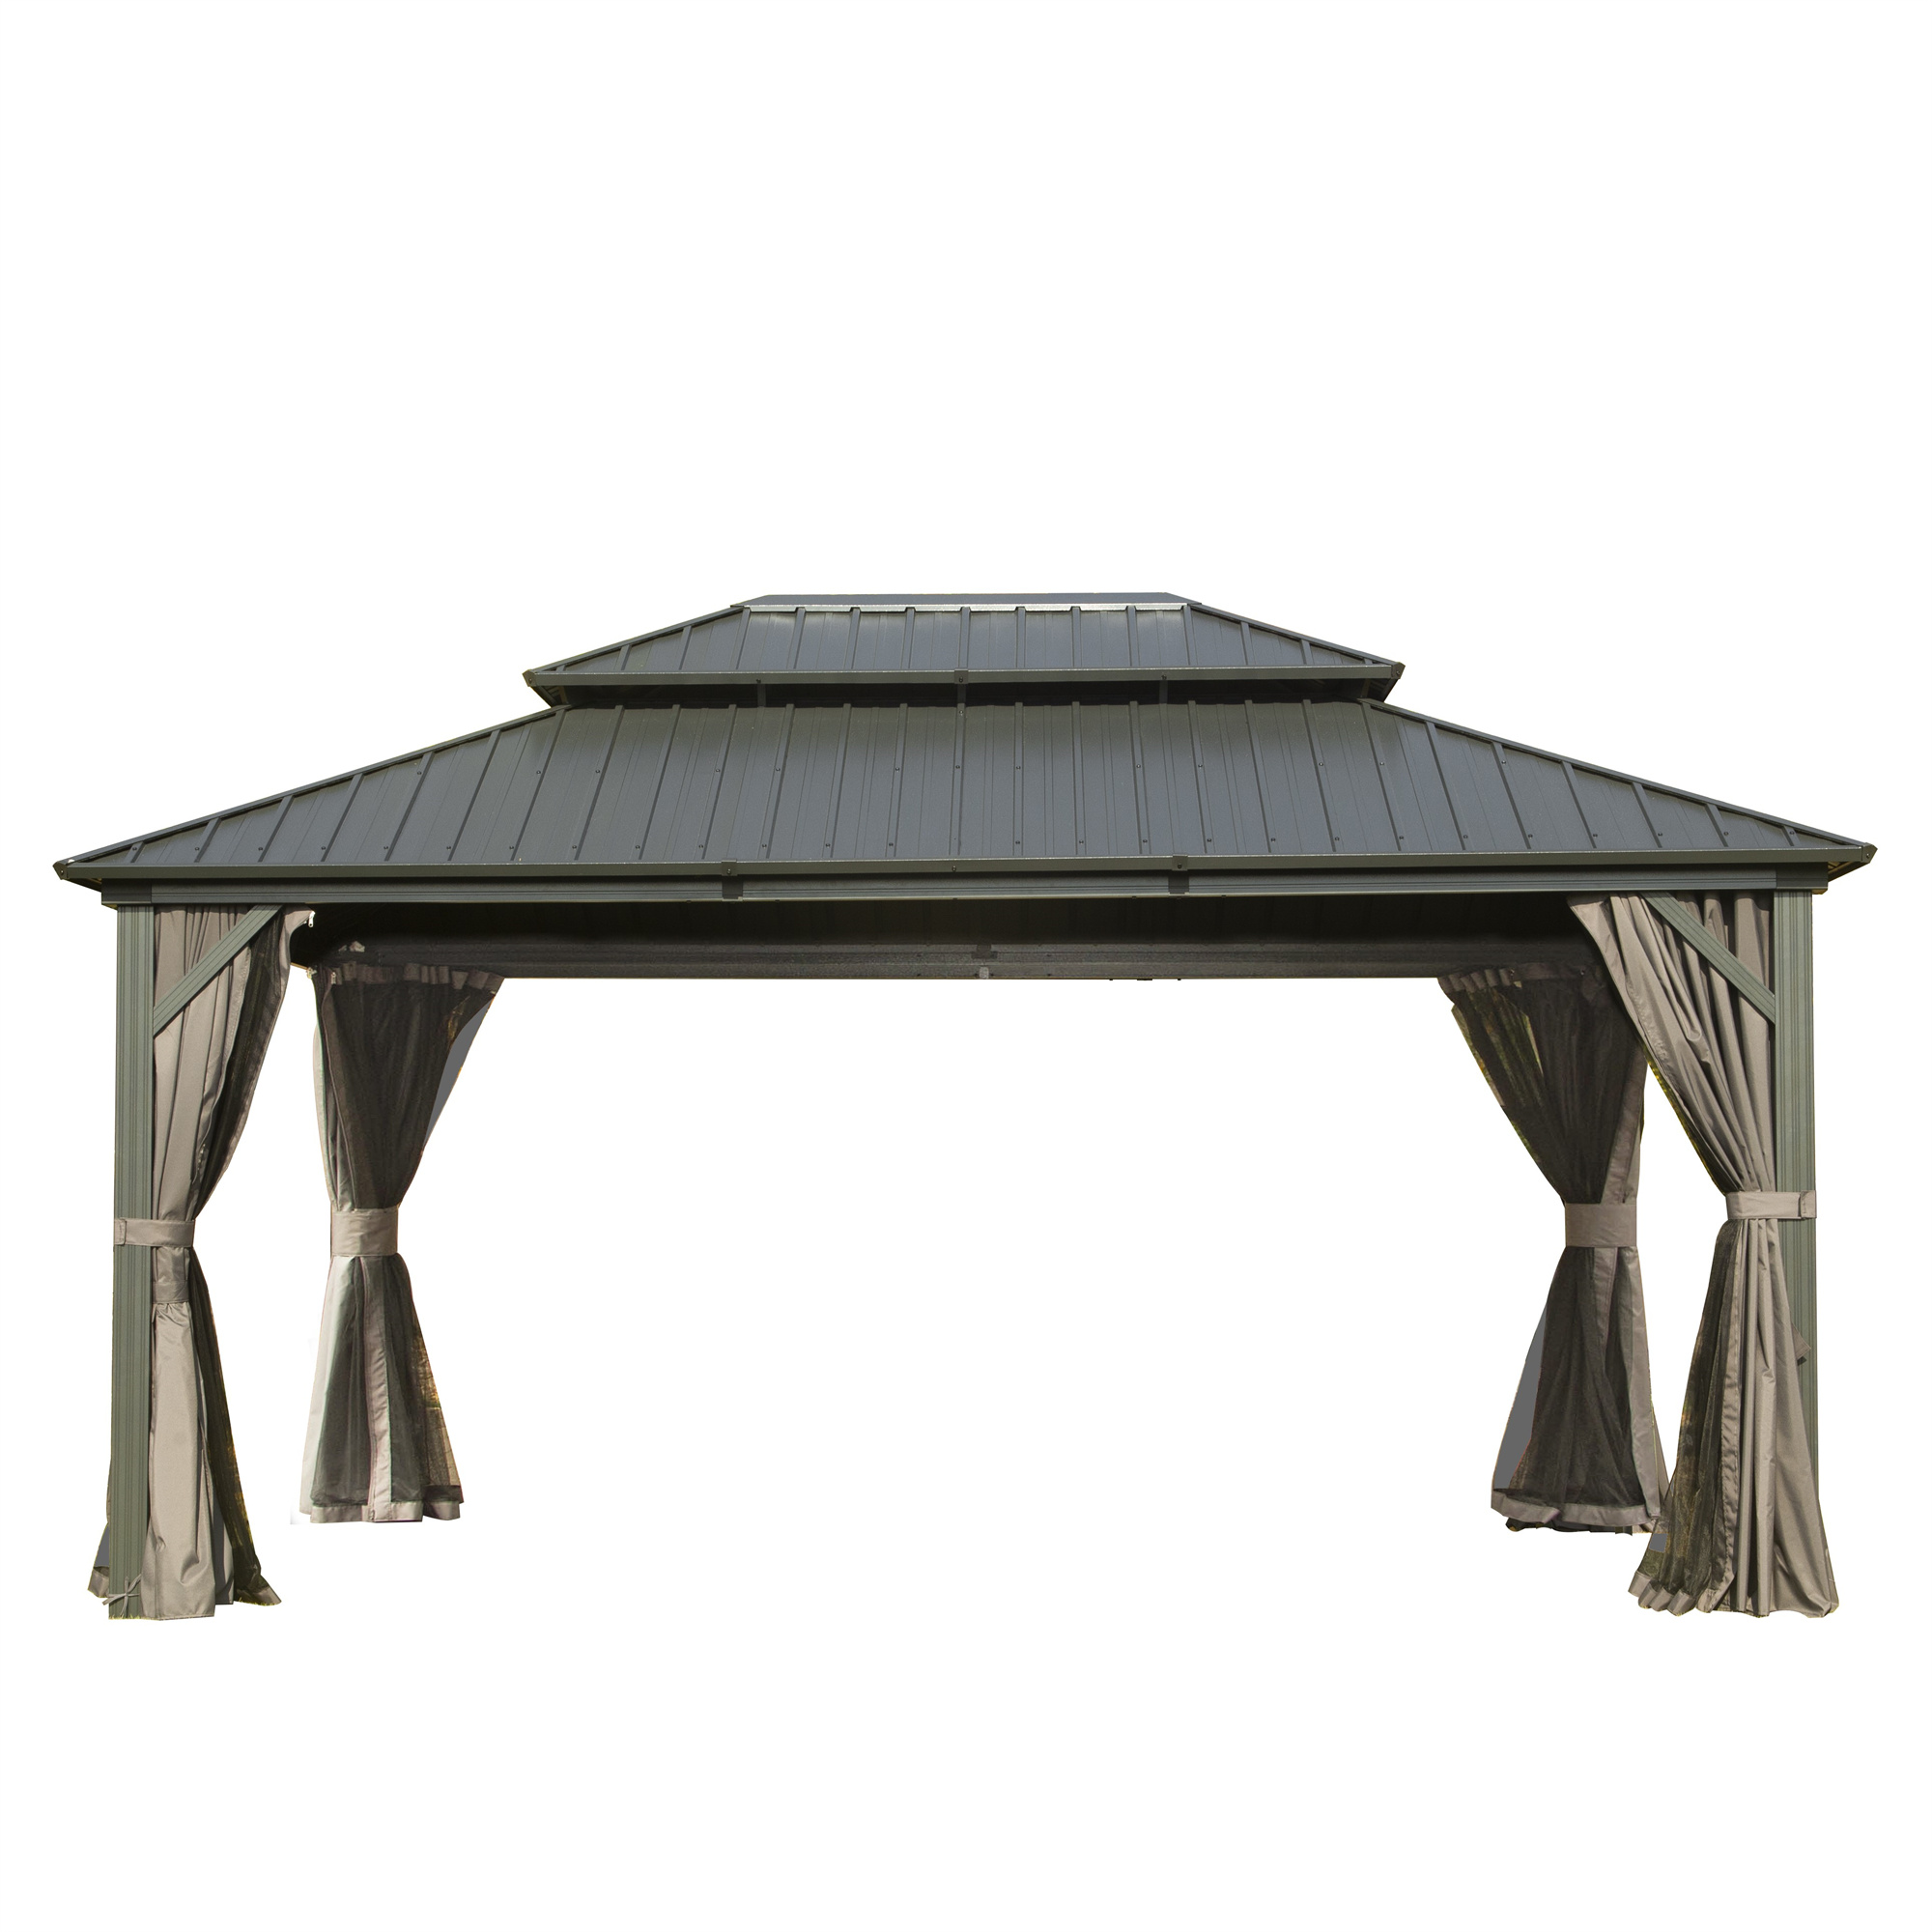 12' x 16' Aluminum Hardtop Outdoor Gazebo with Galvanized Steel Double Roof, Curtain, and Netting for Patio Parties, Wedding, Outdoor Dining